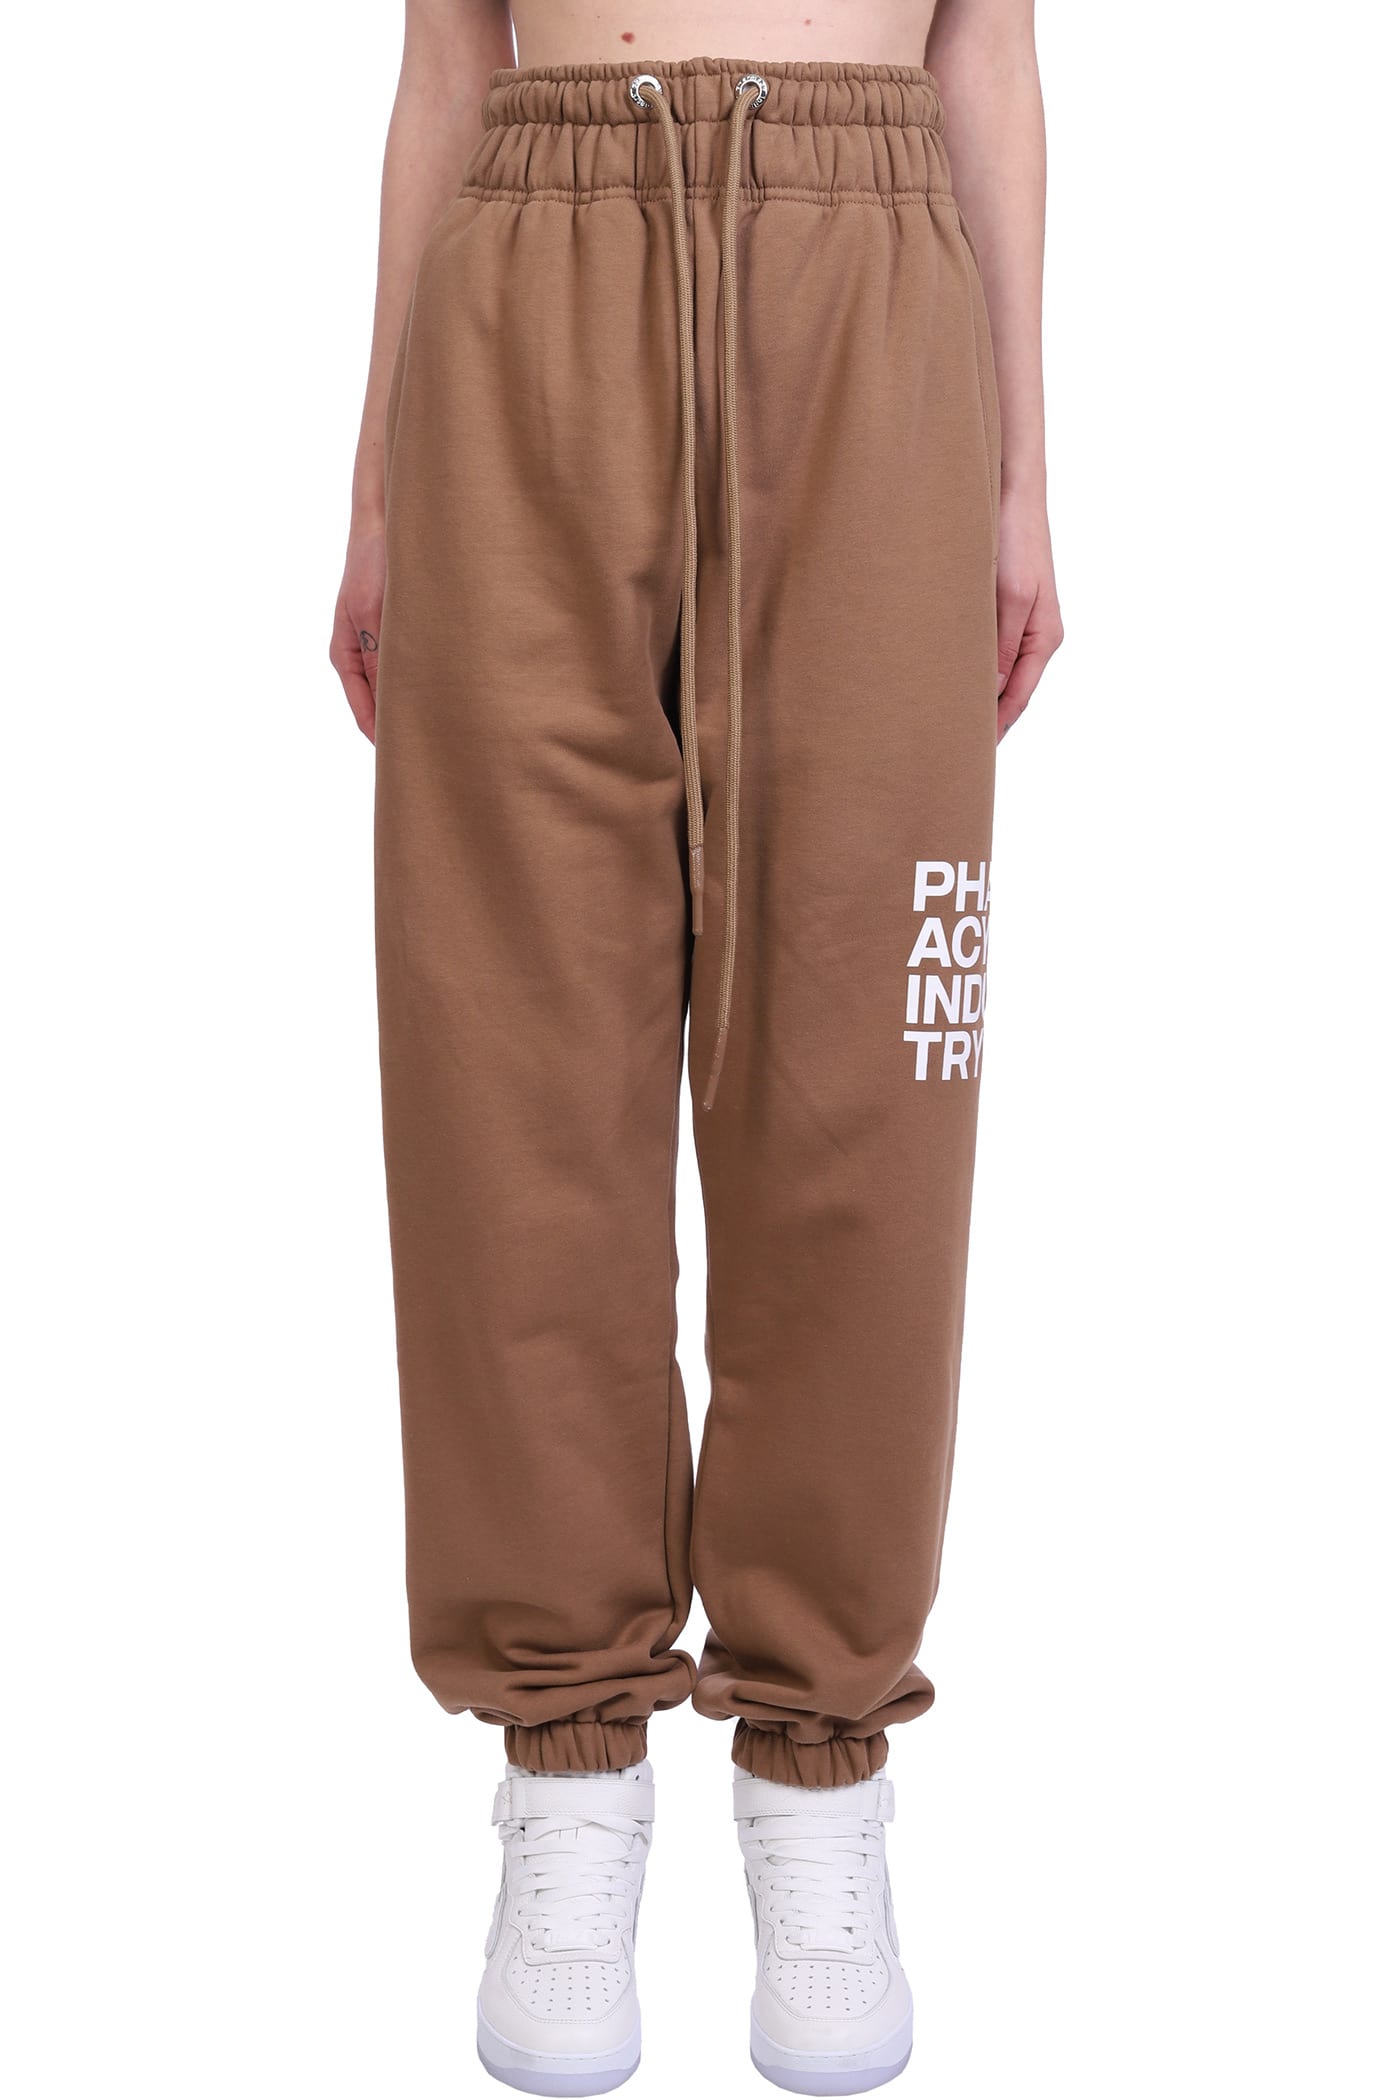 Pharmacy Industry Pants In Brown Cotton